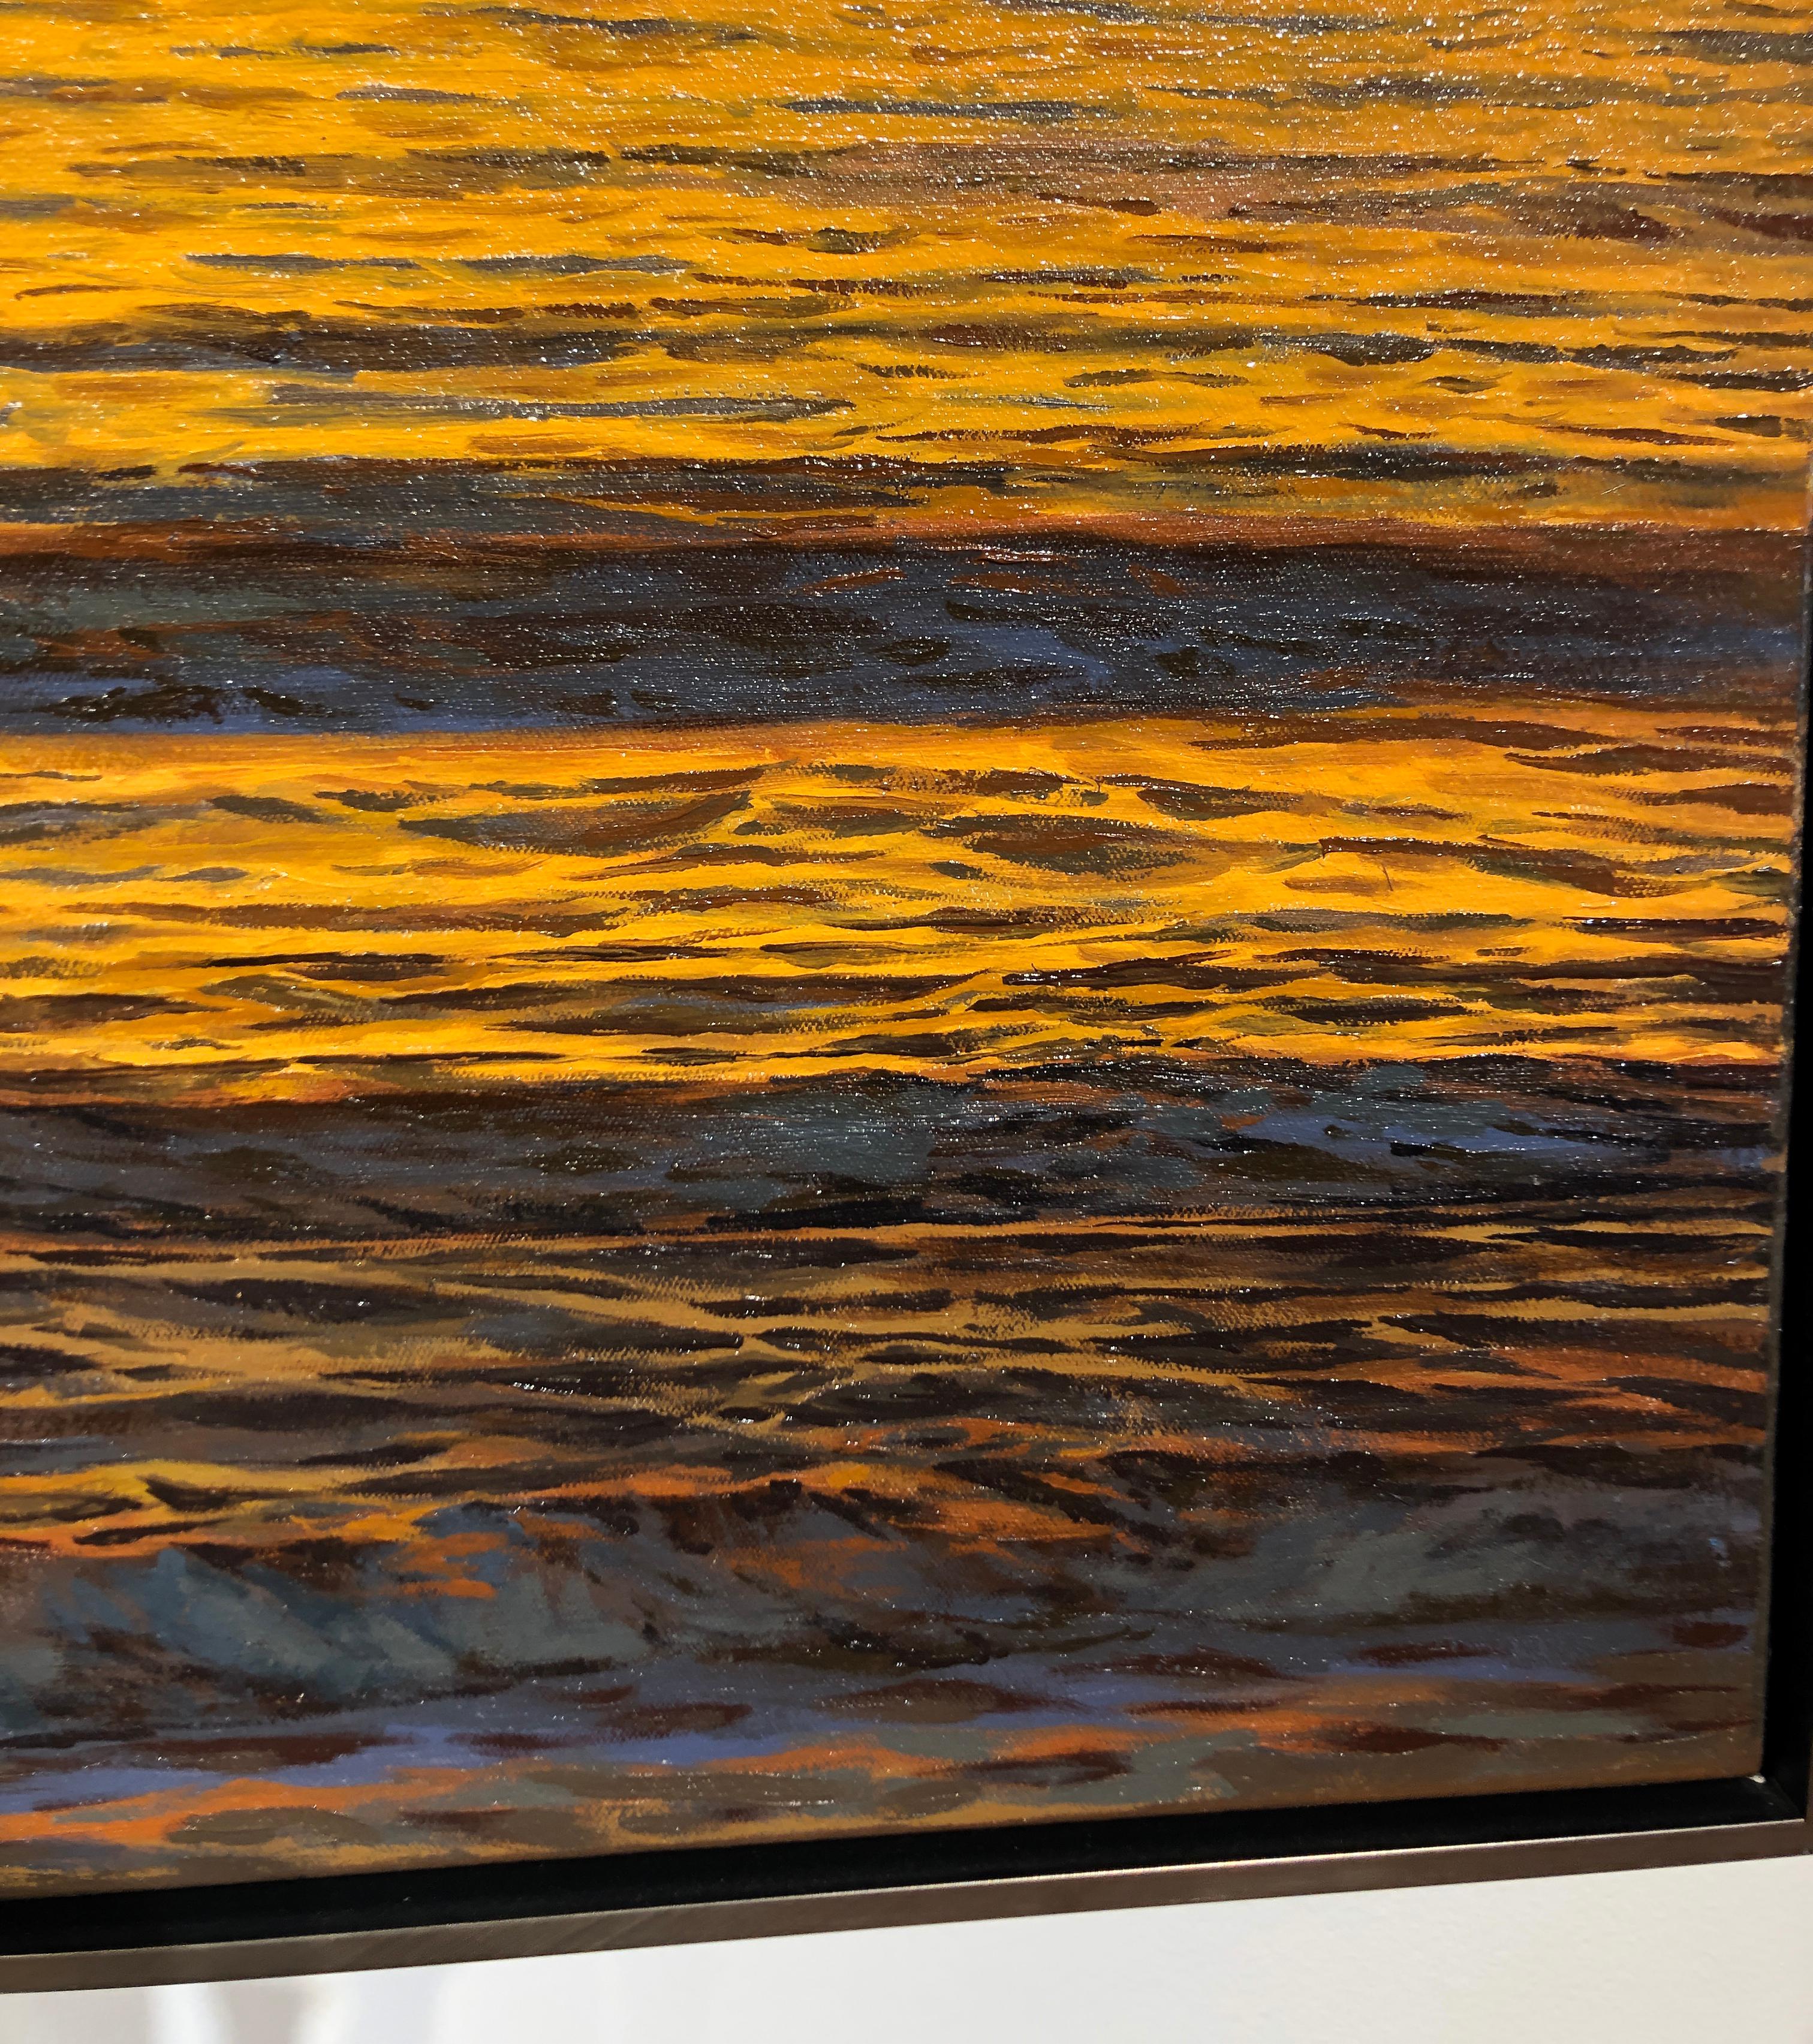 Oceans XIV - Original Oil Painting of Golden Sunset Reflected on Water 5